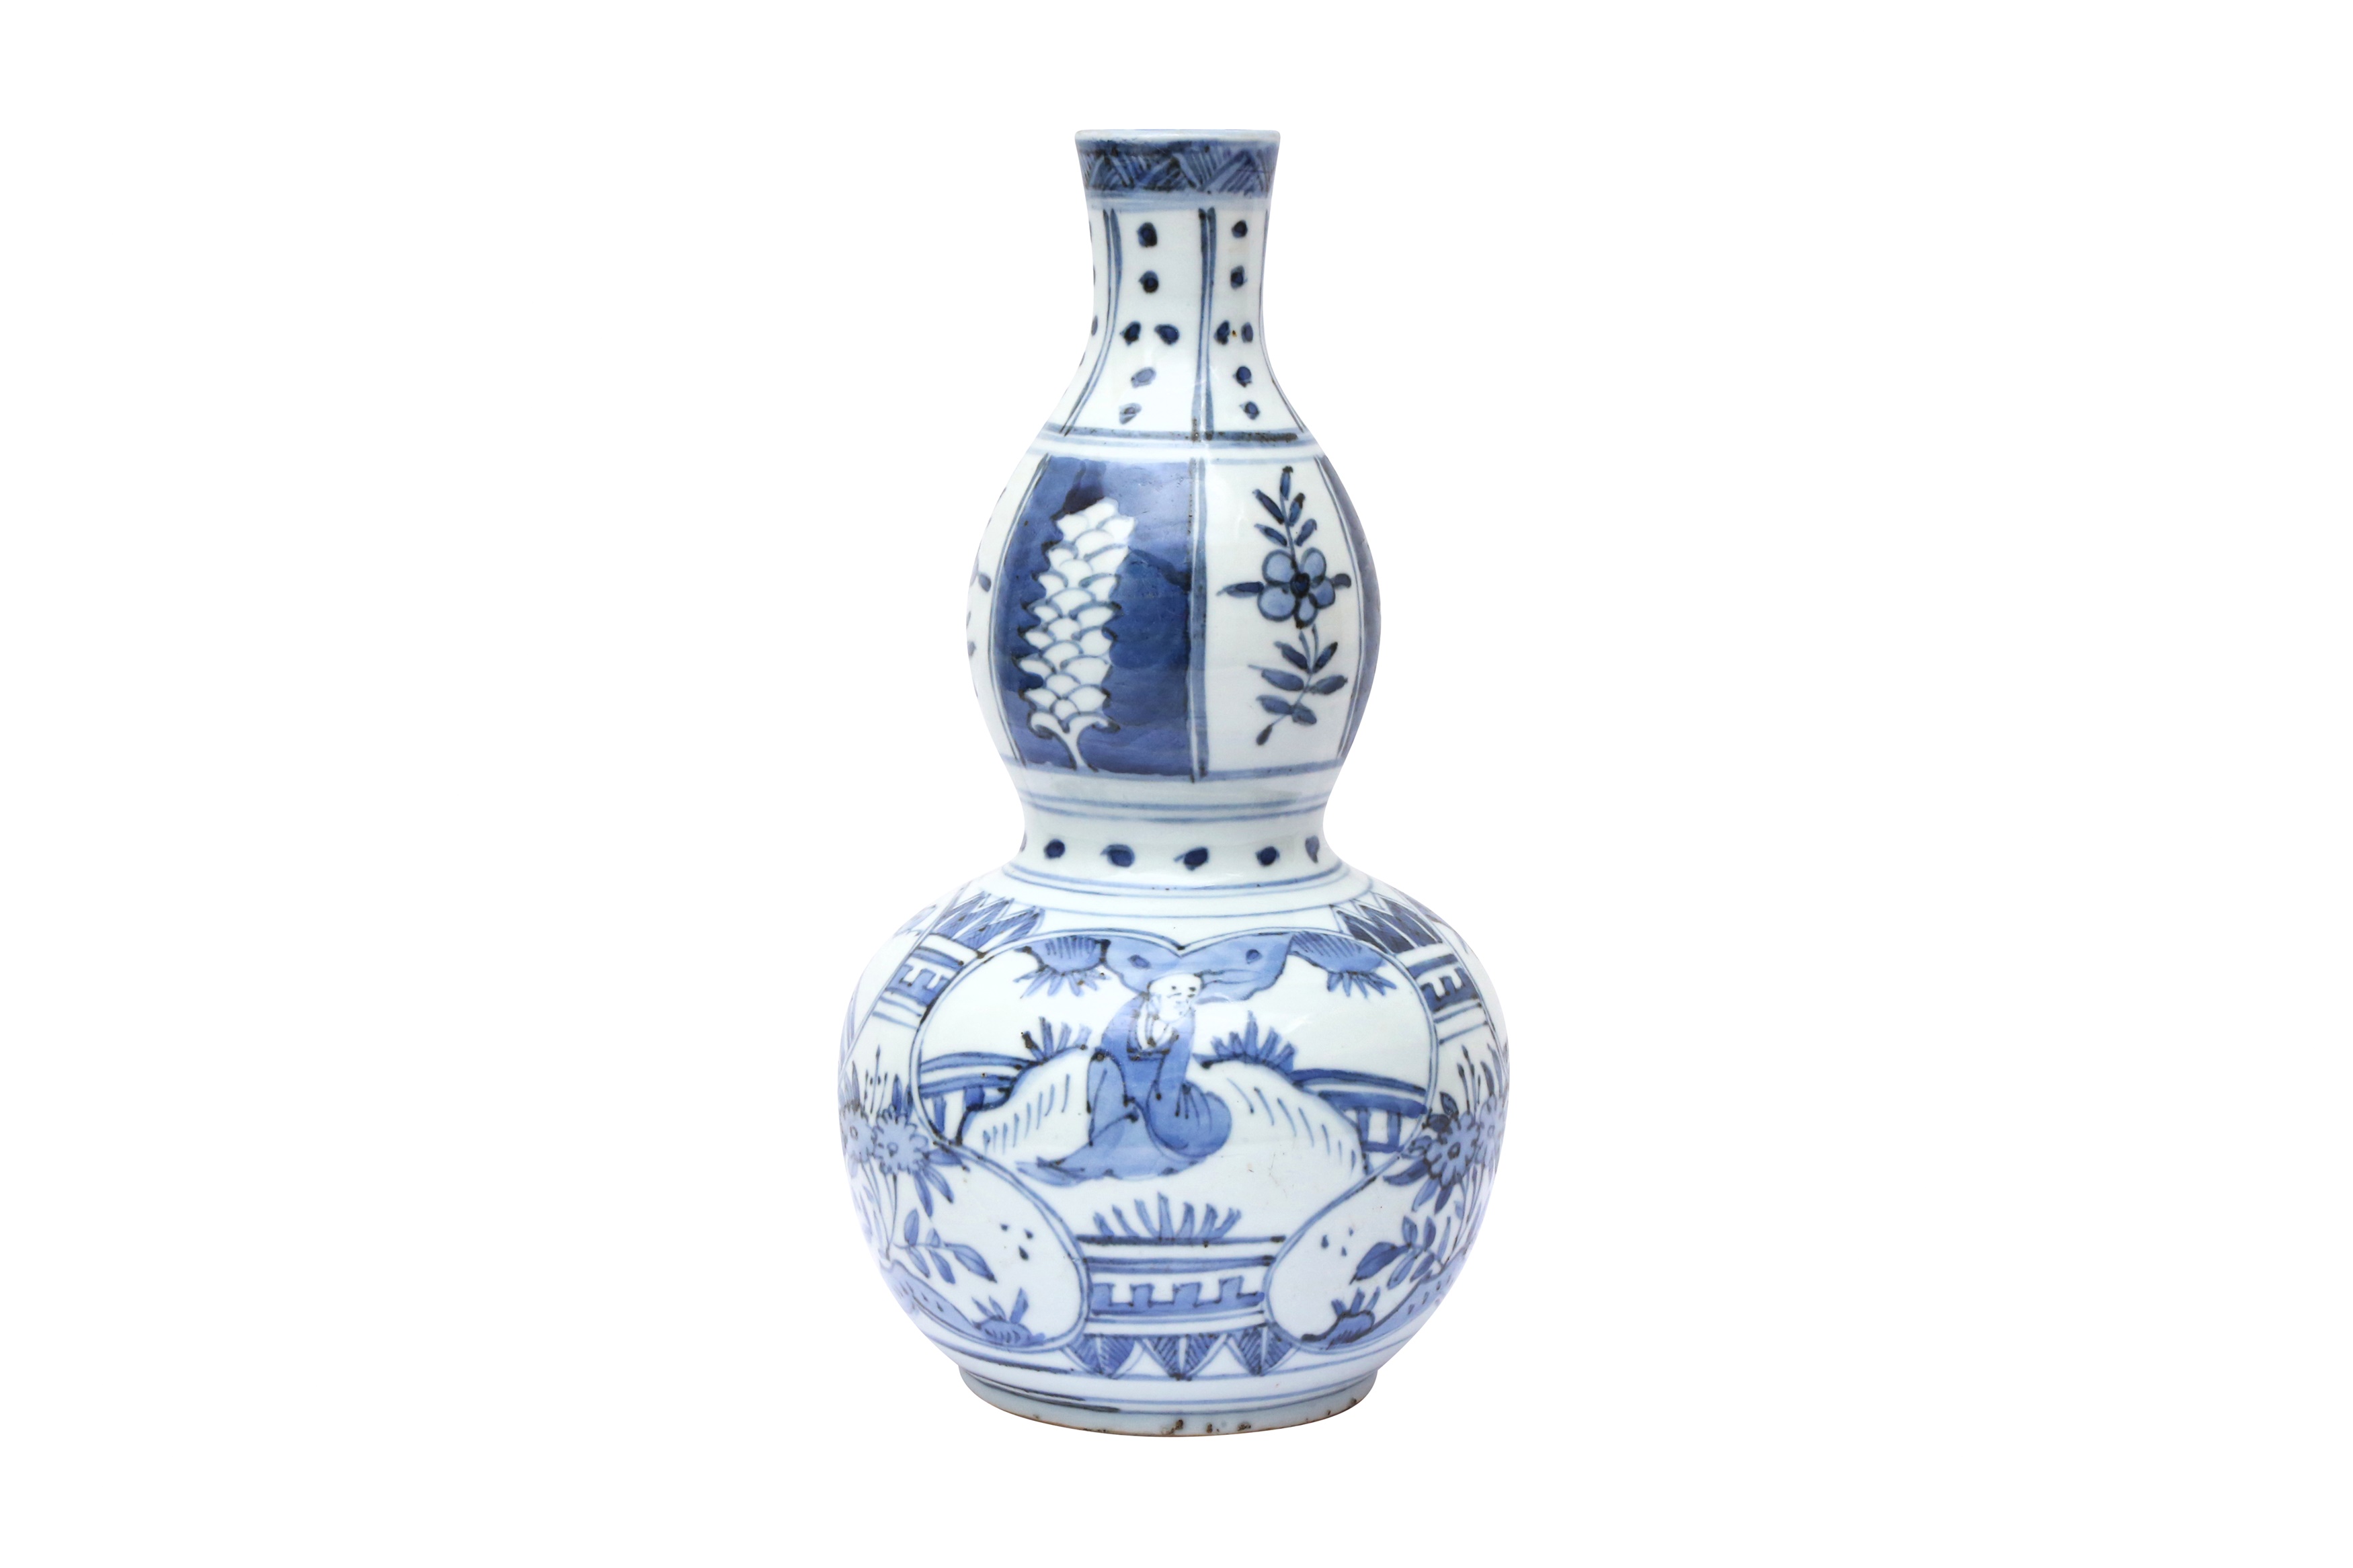 A CHINESE MING-STYLE BLUE AND WHITE DOUBLE GOURD VASE 二十世紀 明式青花葫蘆瓶 - Image 2 of 10